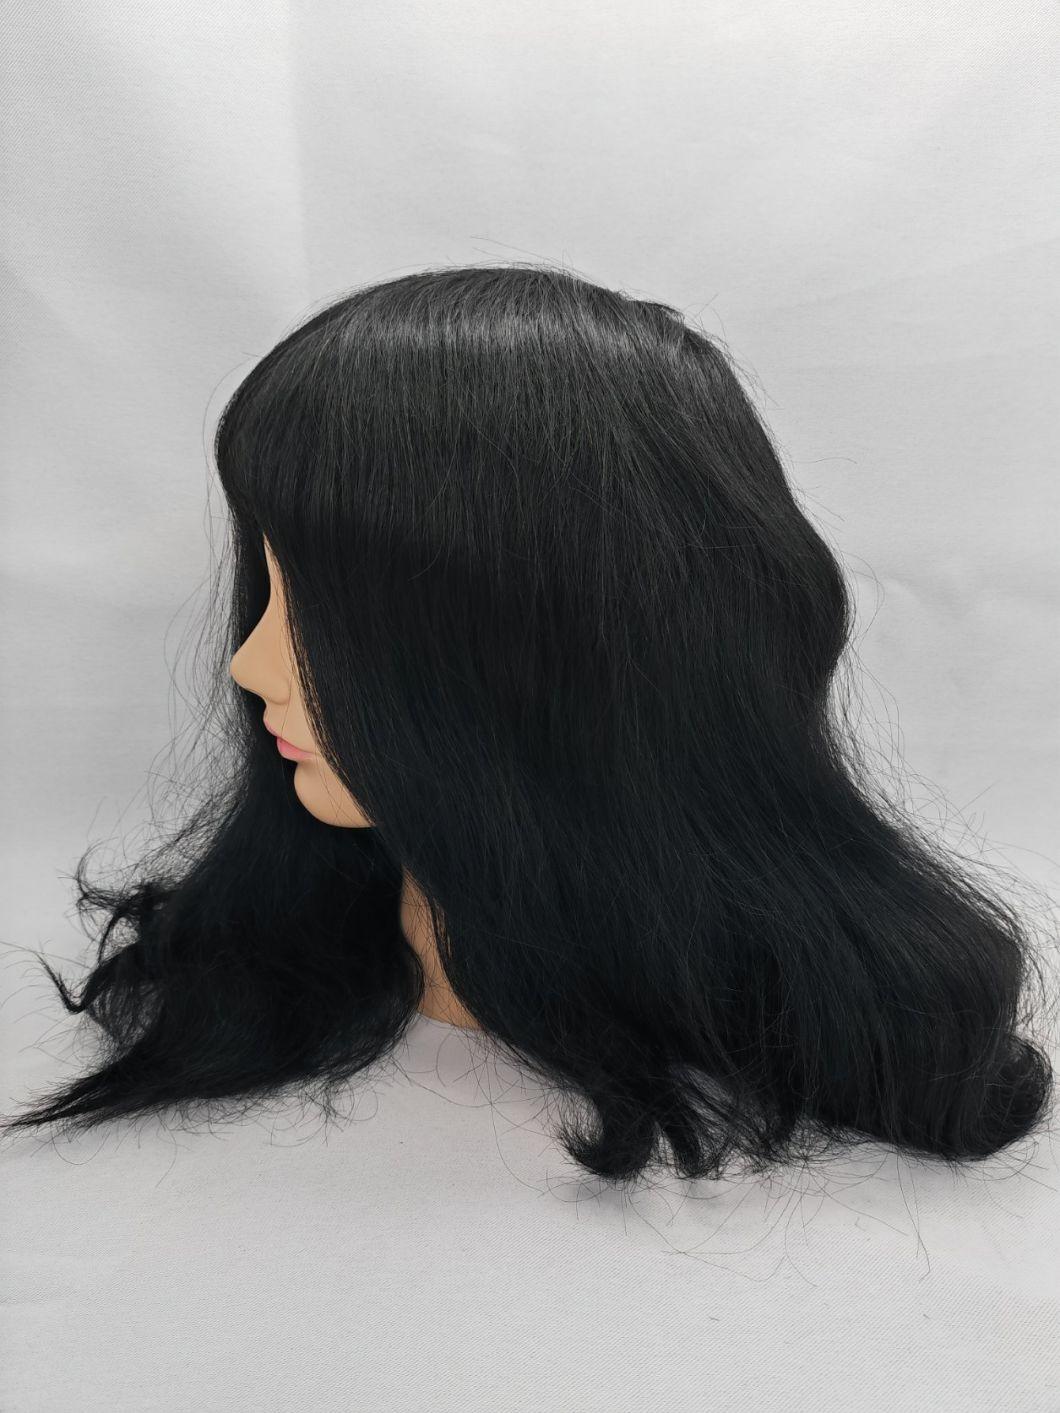 2022 Best Ventilated Fine Mono Base Human Hair System Made of Remy Human Hair